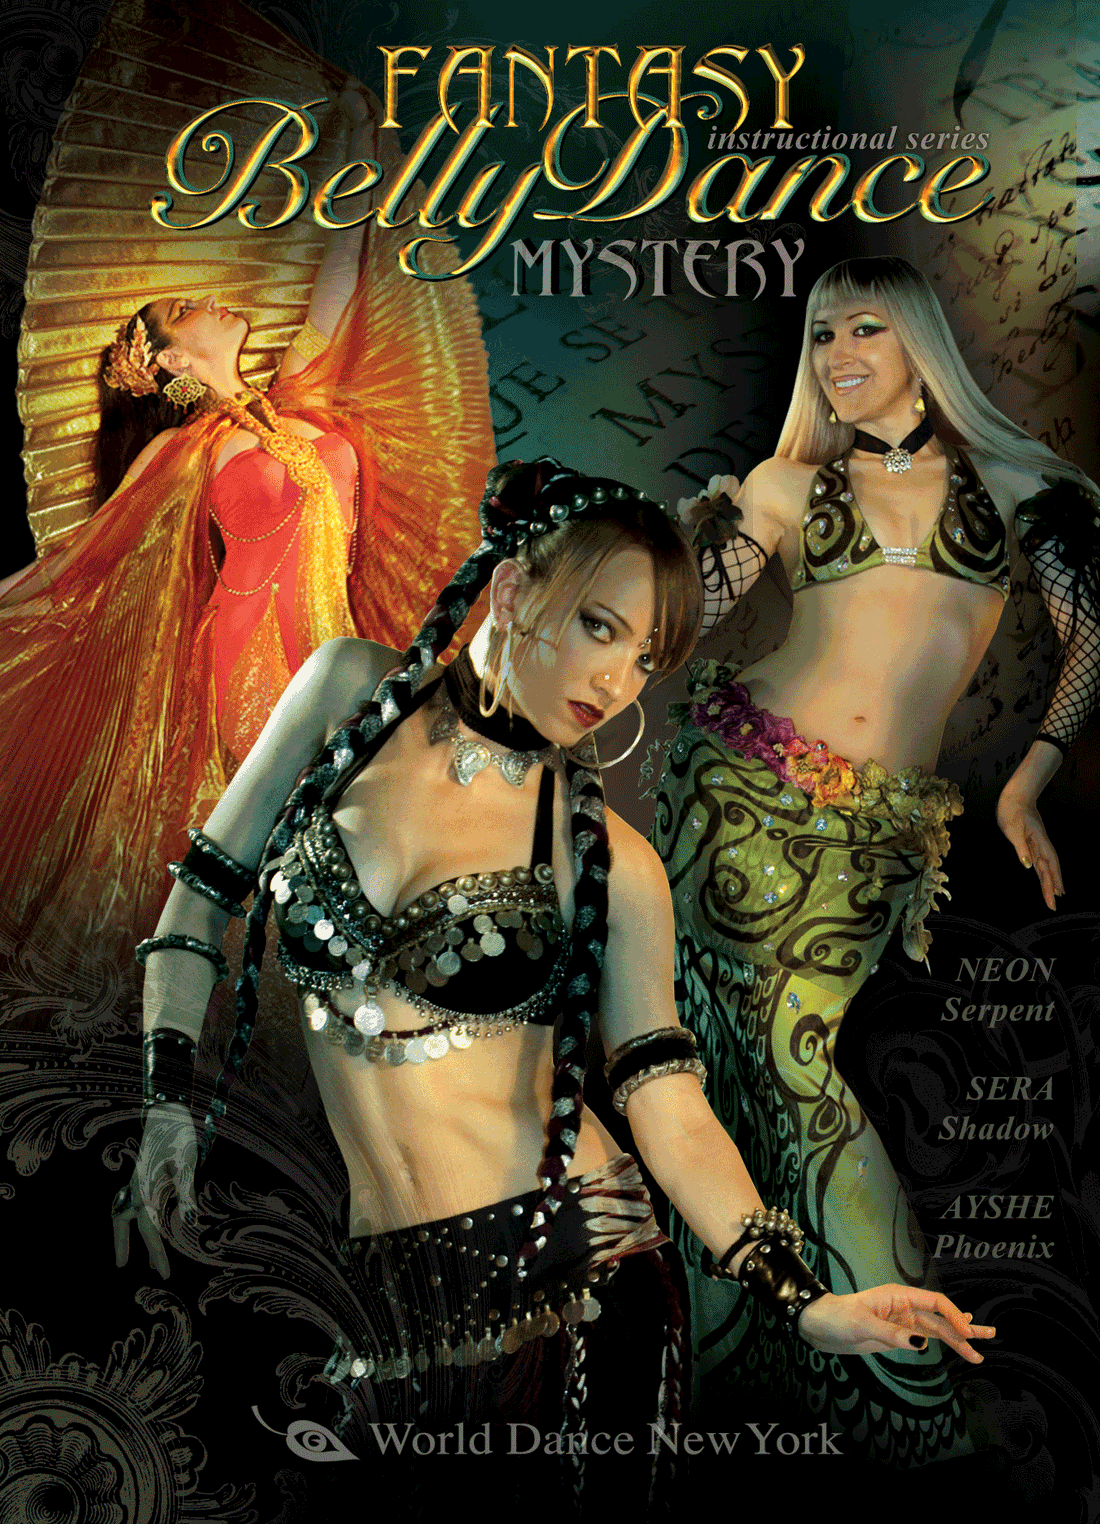 Fantasy Belly Dance: Mystery - 3 advanced choreographies  - INSTANT VIDEO / DVD - World Dance New York